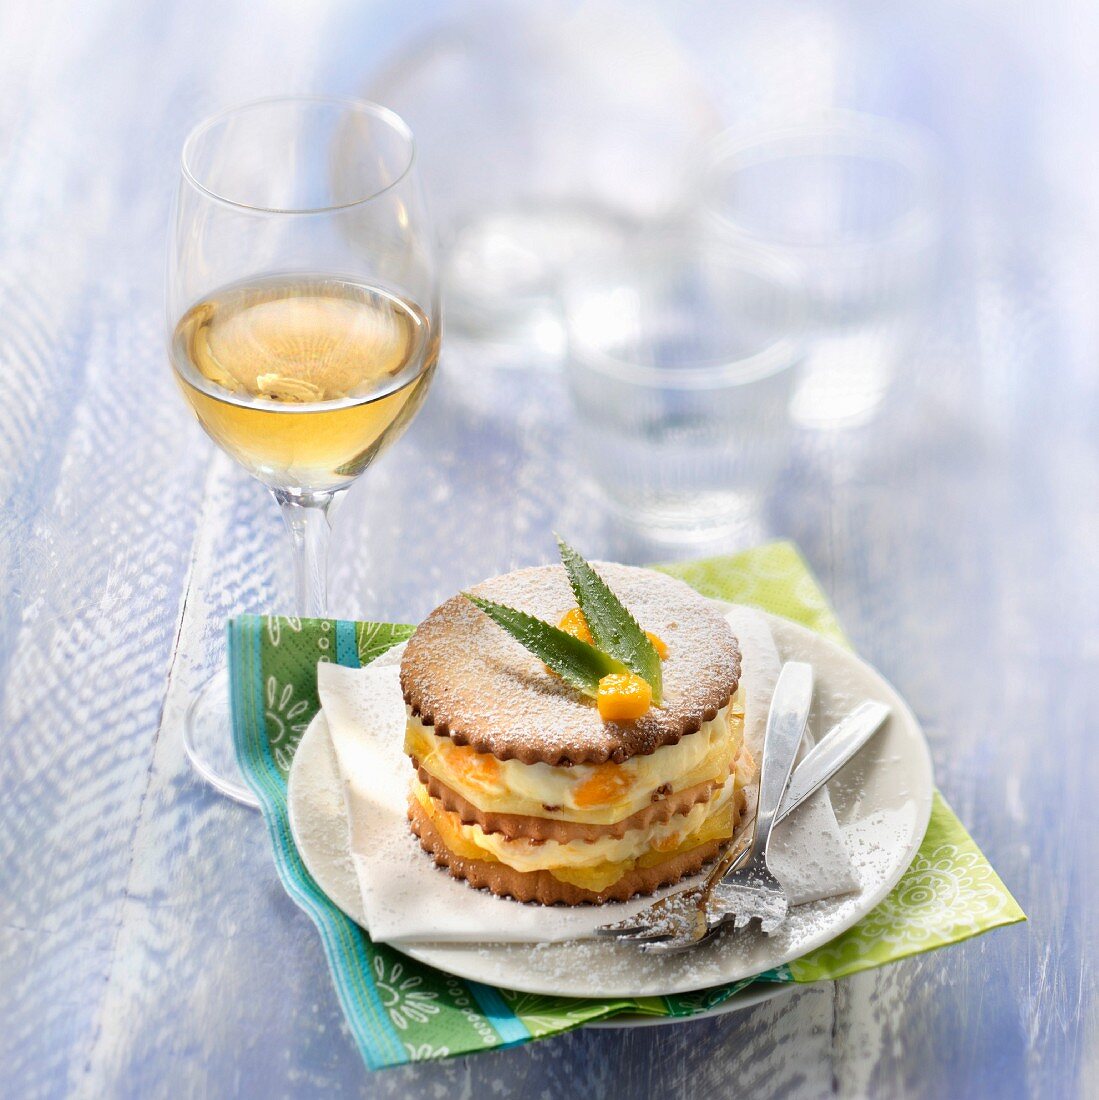 Mango and pineapple shortbread mille-feuille, glass of sweet white wine